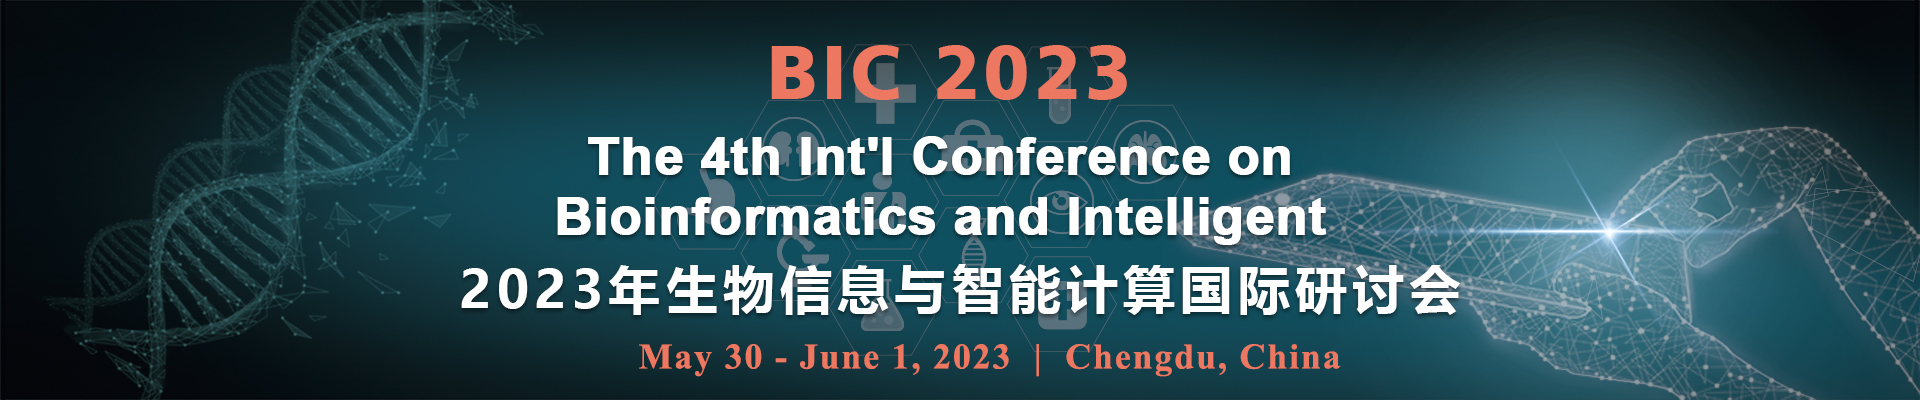 The 4th Int'l Conference on Bioinformatics and Intelligent Computing (BIC 2023), Chengdu, Sichuan, China